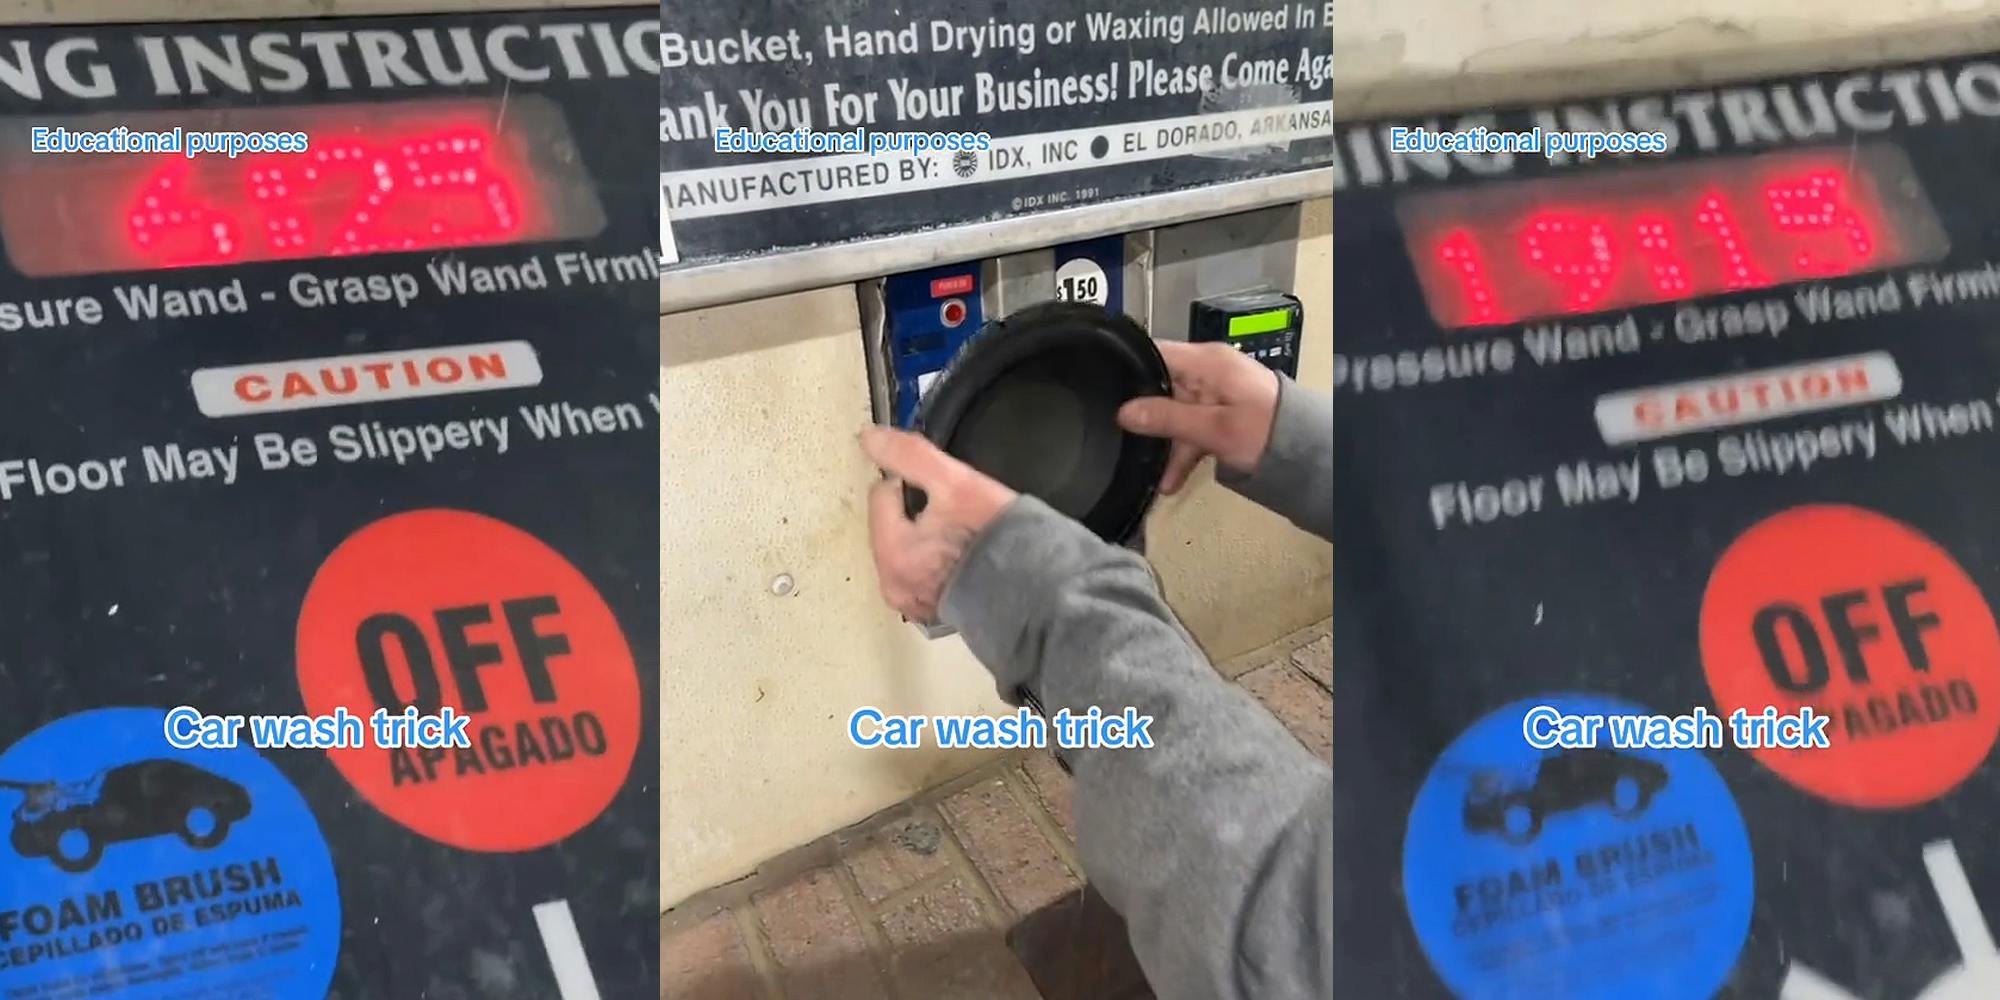 car wash minutes on screen with caption "Educational purposes Car wash trick" (l) customers holding magnet up to car wash minutes on screen with caption "Educational purposes Car wash trick" (c) car wash minutes on screen with caption "Educational purposes Car wash trick" (r)